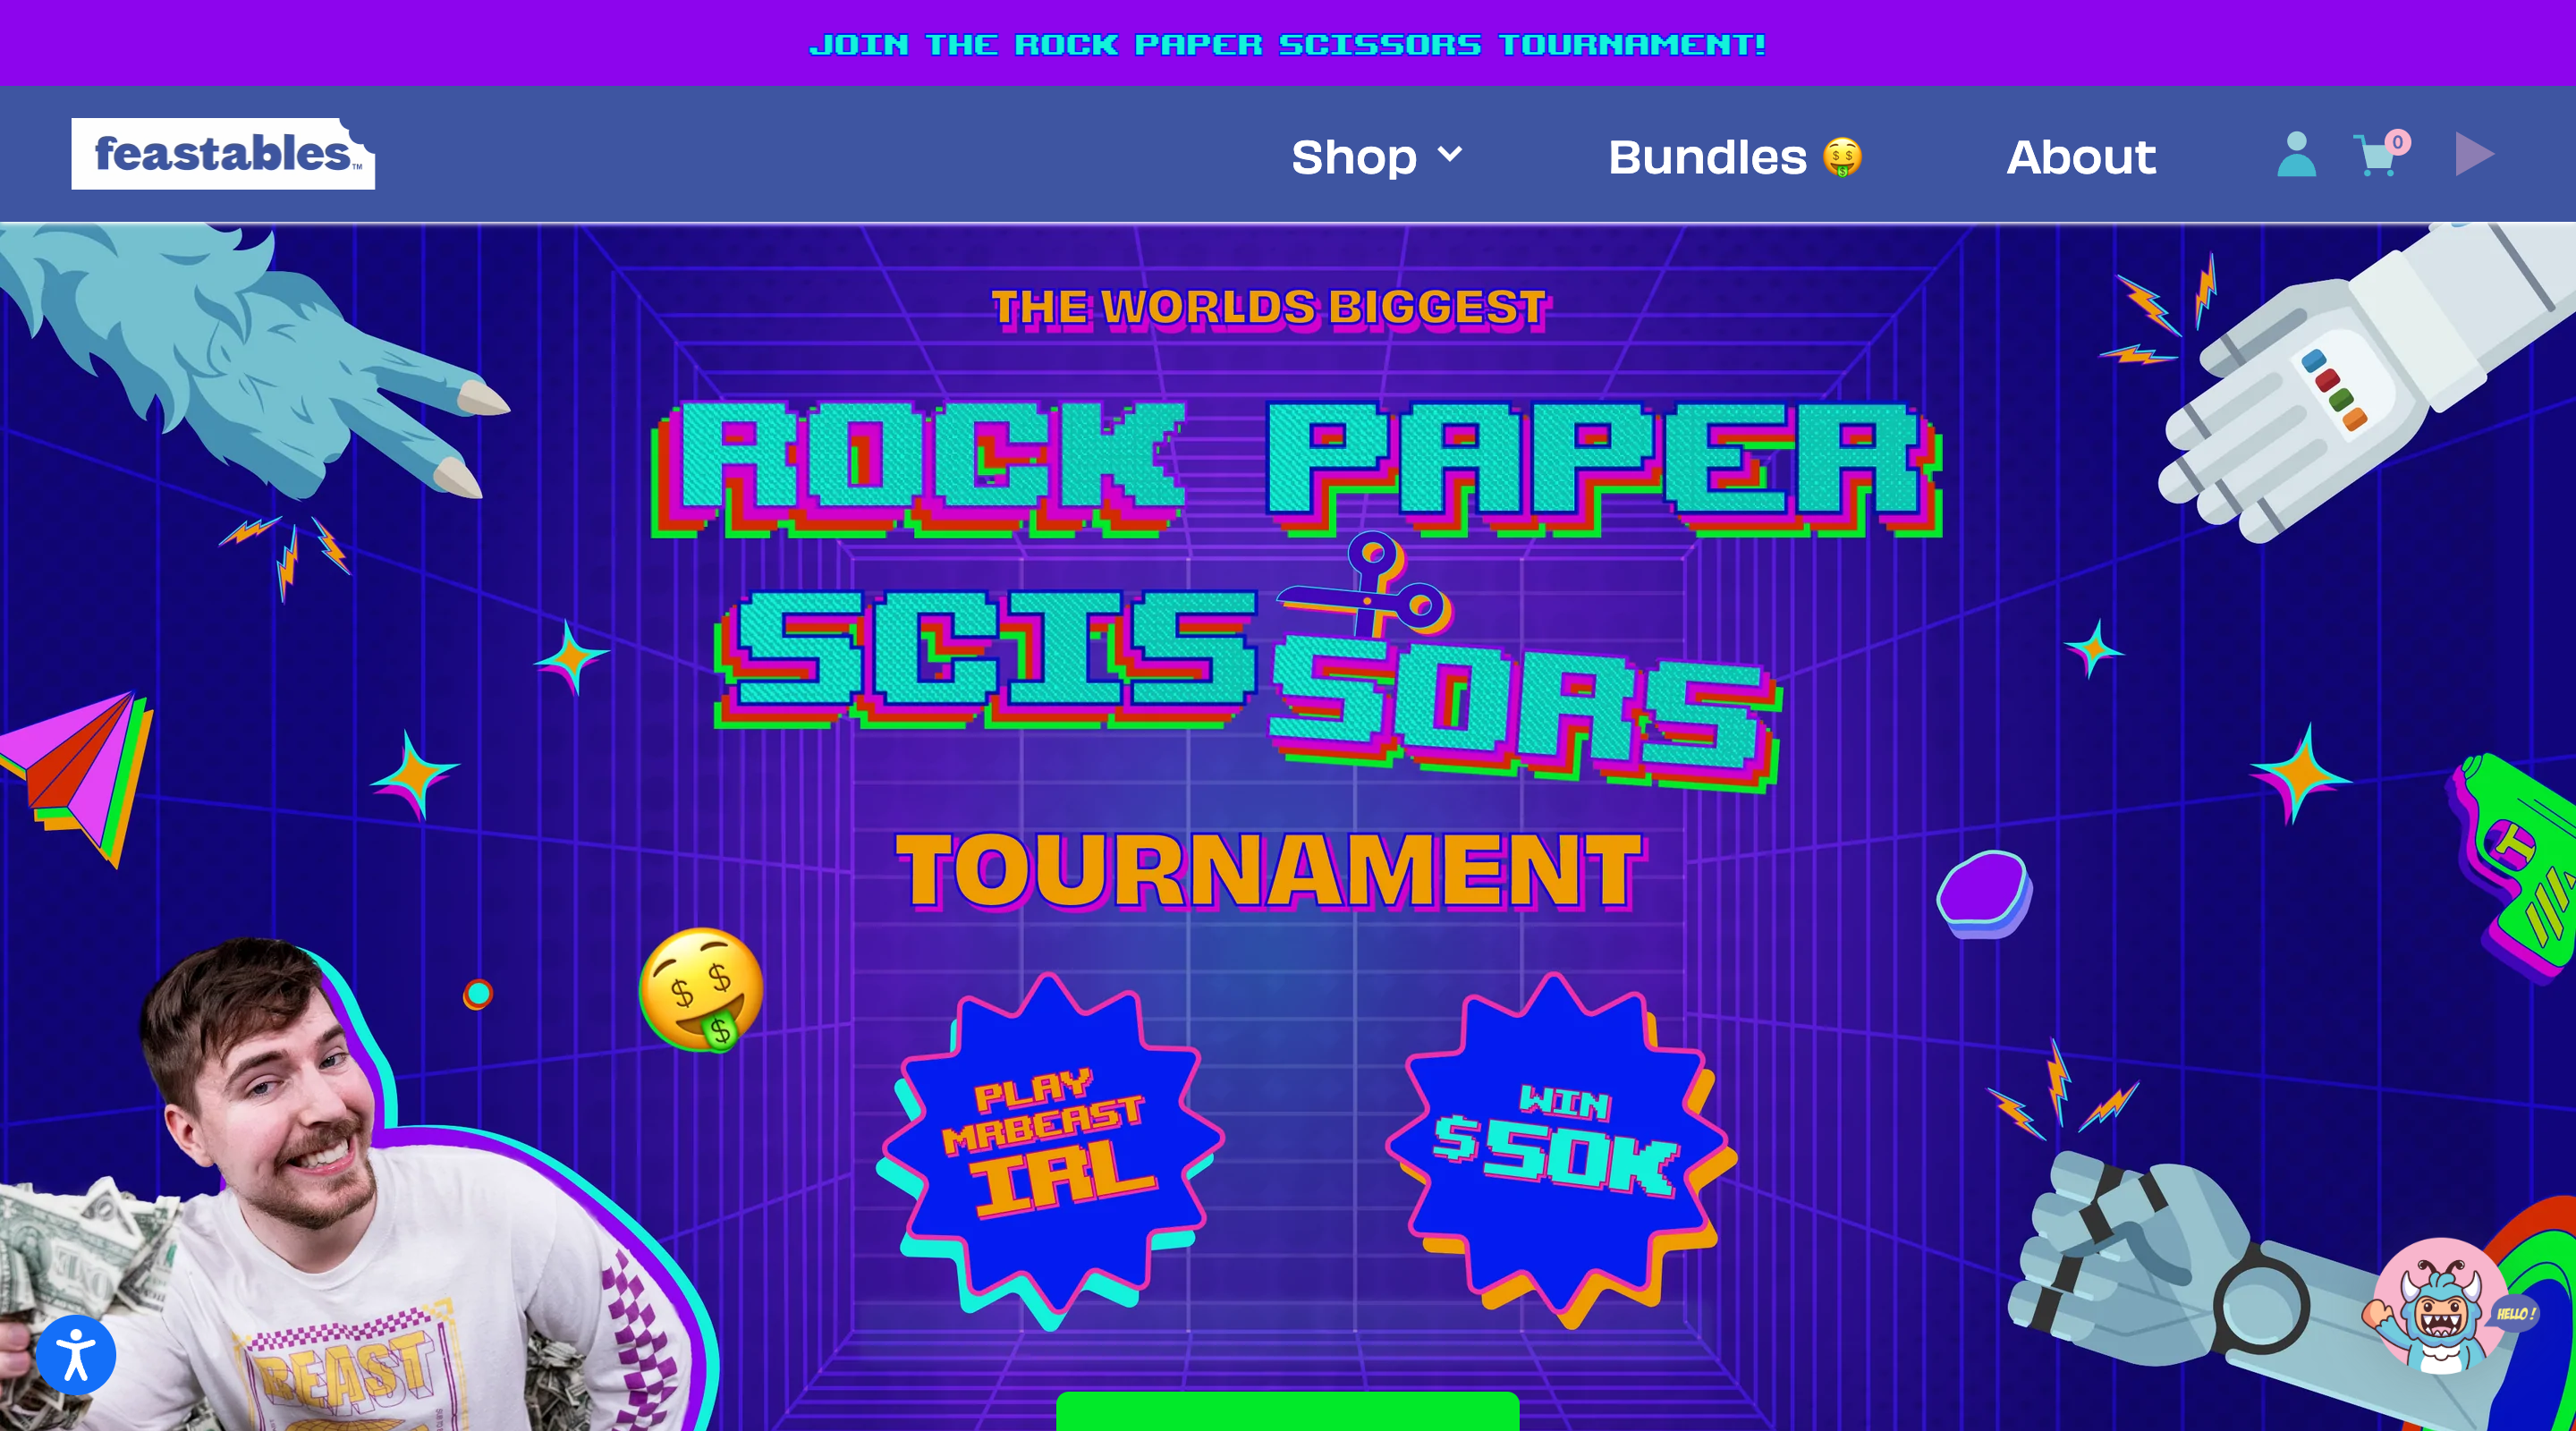 Screenshot of the Feastables website. A fixed header contains the Feastables logo and main site navigation. Below is a promotion for 'The World’s Biggest Rock Paper Scissors Tournament'. An illustration depicts robots and hairy creatures playing rock paper scissors. In the lower left corner of the screen there is a photograph of Mr Beast holding a wad of cash.